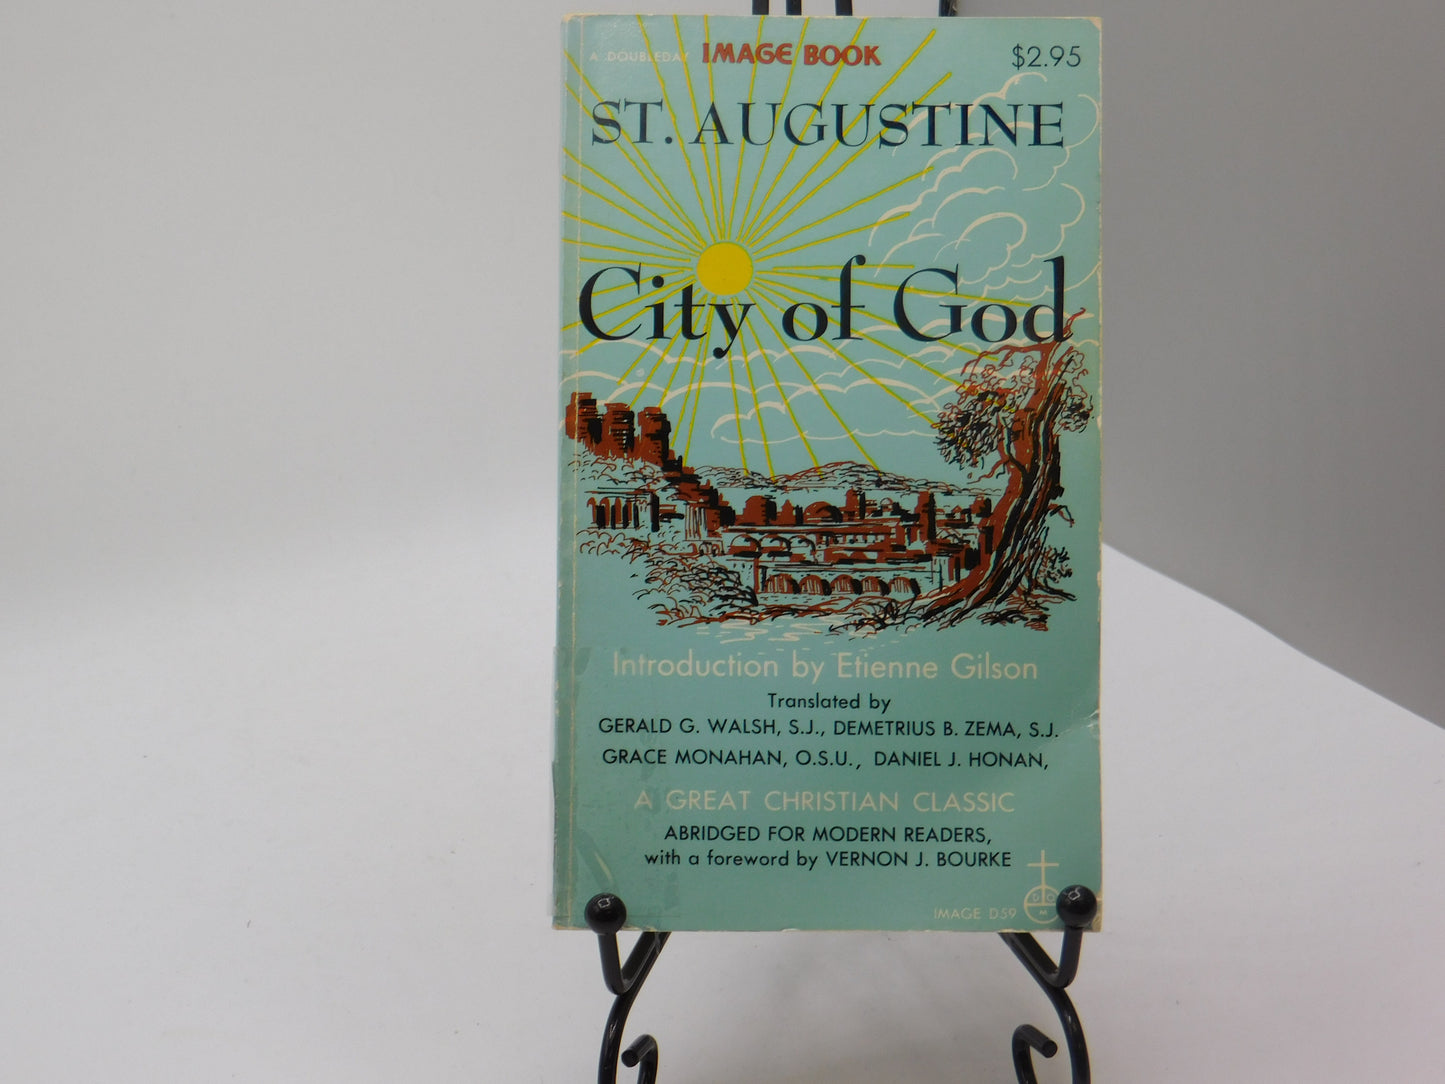 Saint Augustine City of God by  Etienne Gilson